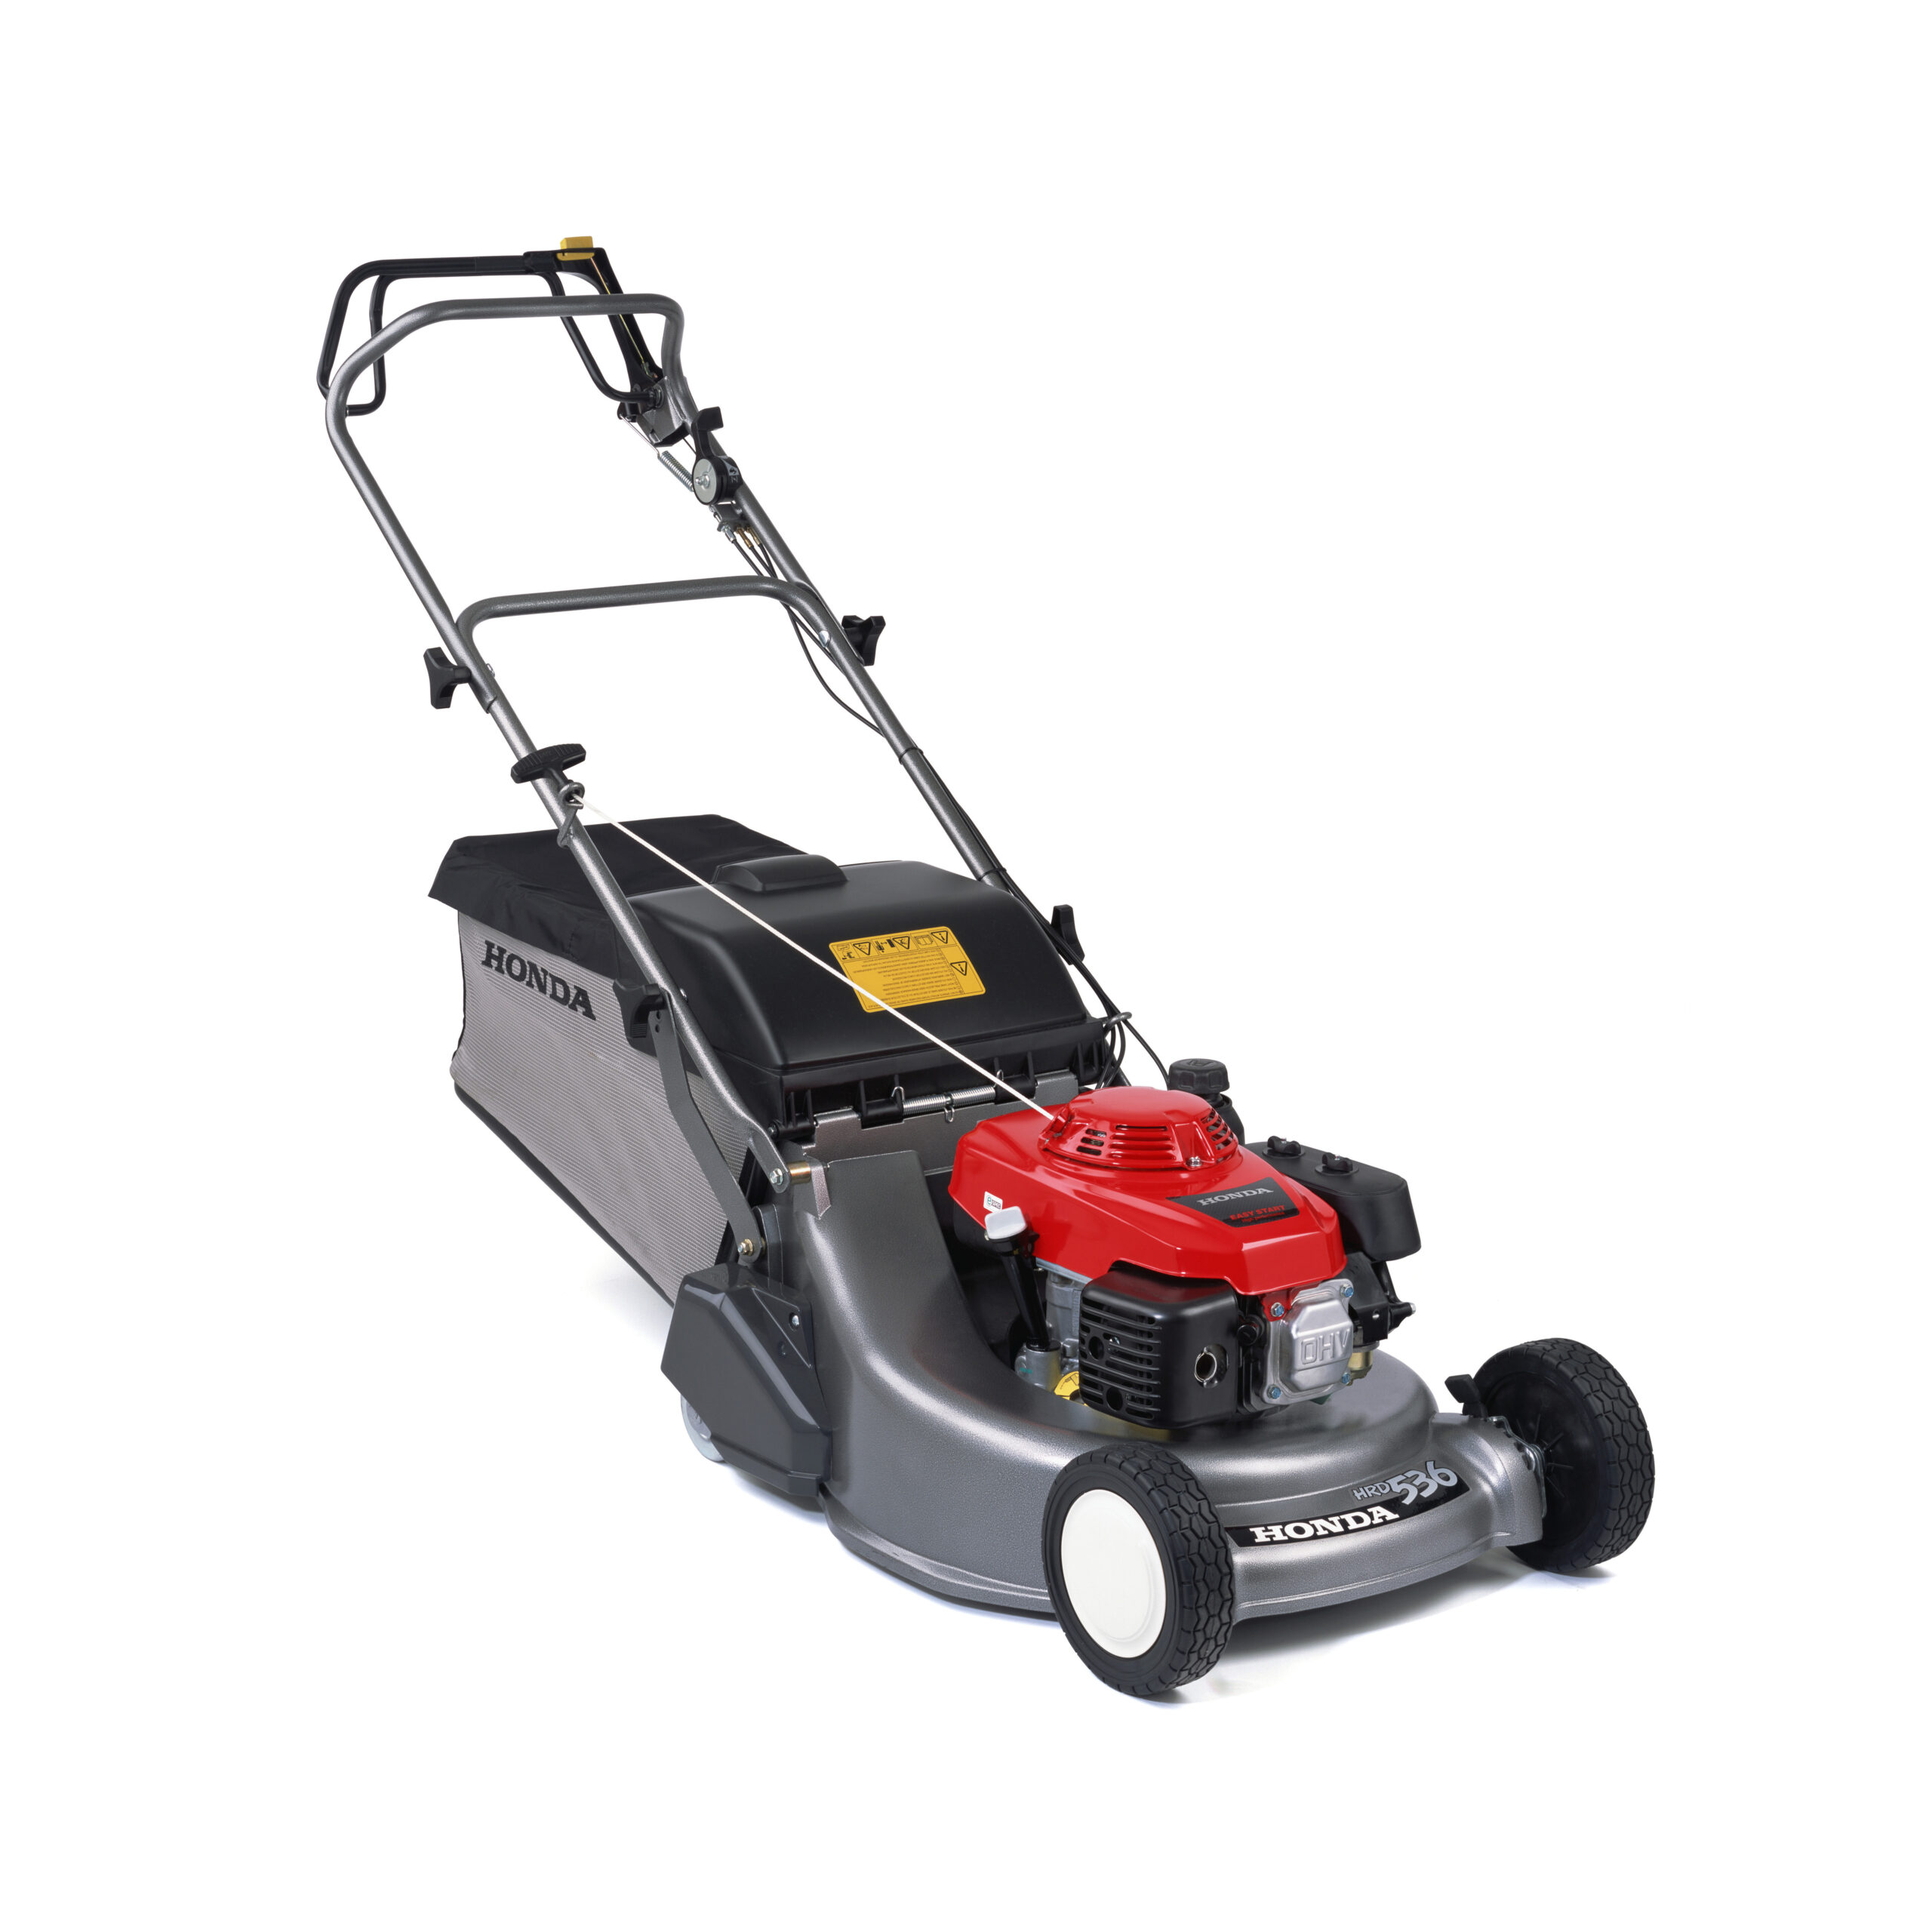 Image of Save &pound334: HONDA Core 21inch Self Propelled Lawn Mower - HRD536 QX